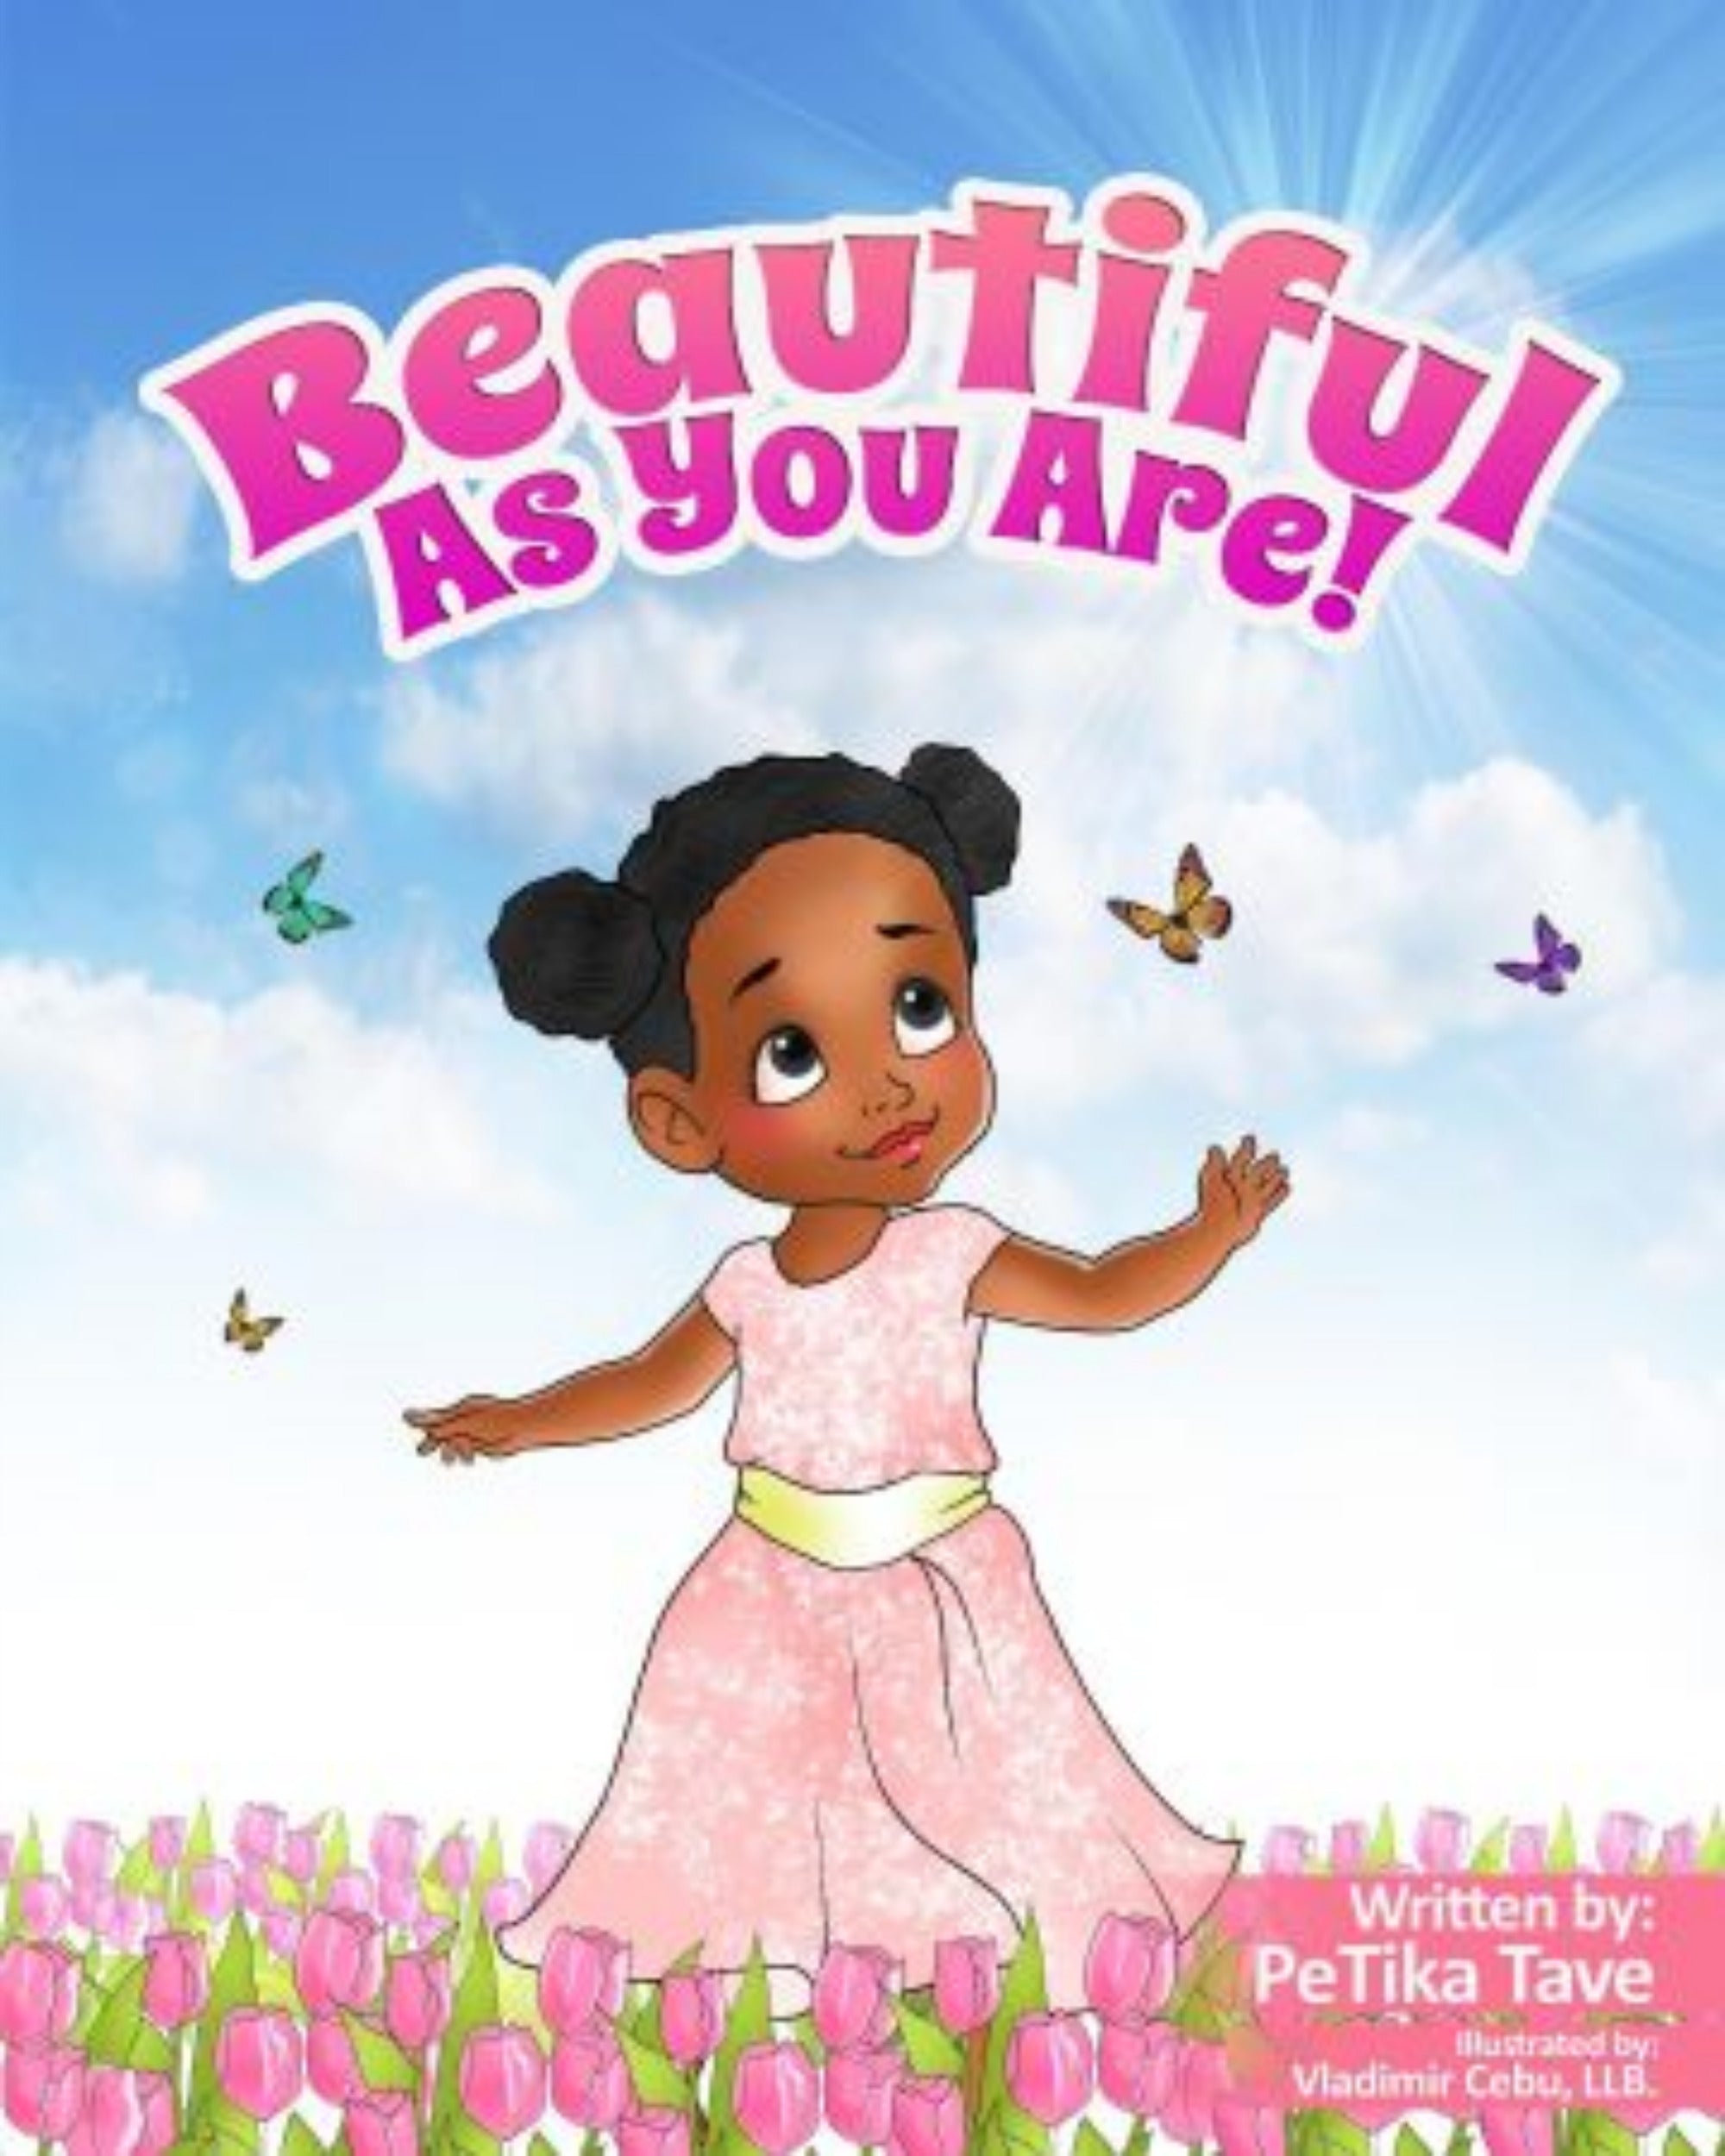 Beautiful As You Are (Hardcover)